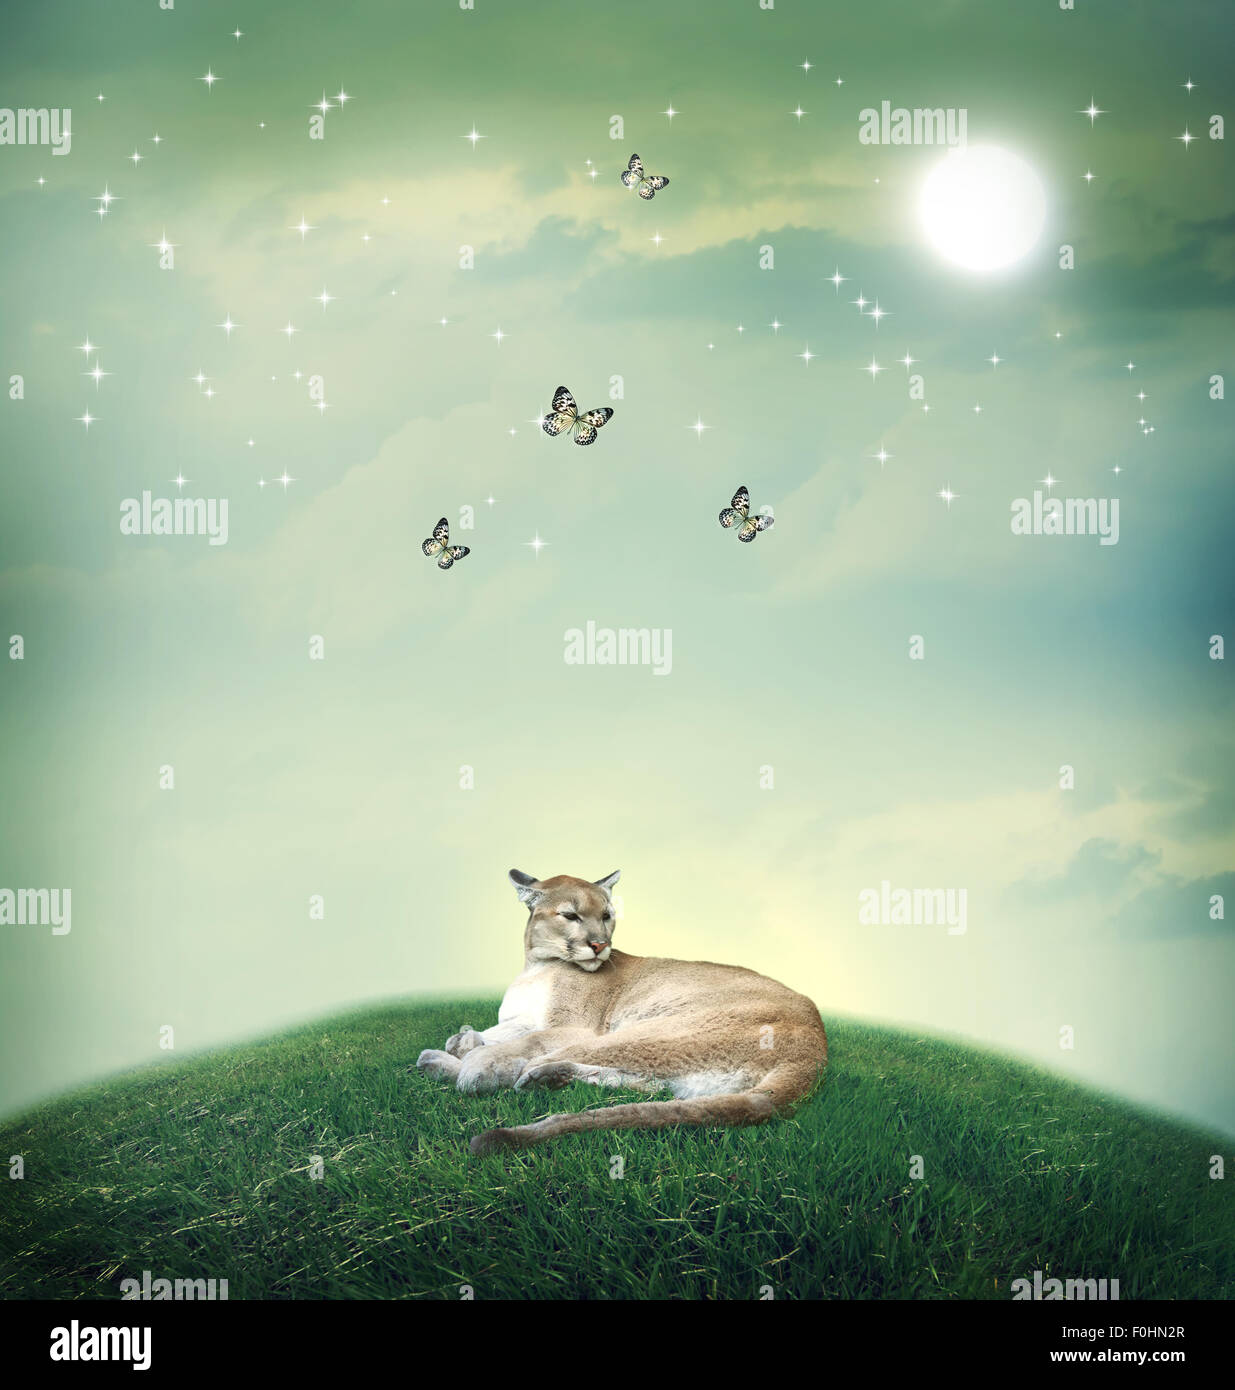 Cougar in a fantasy hilltop landscape with butterflies Stock Photo